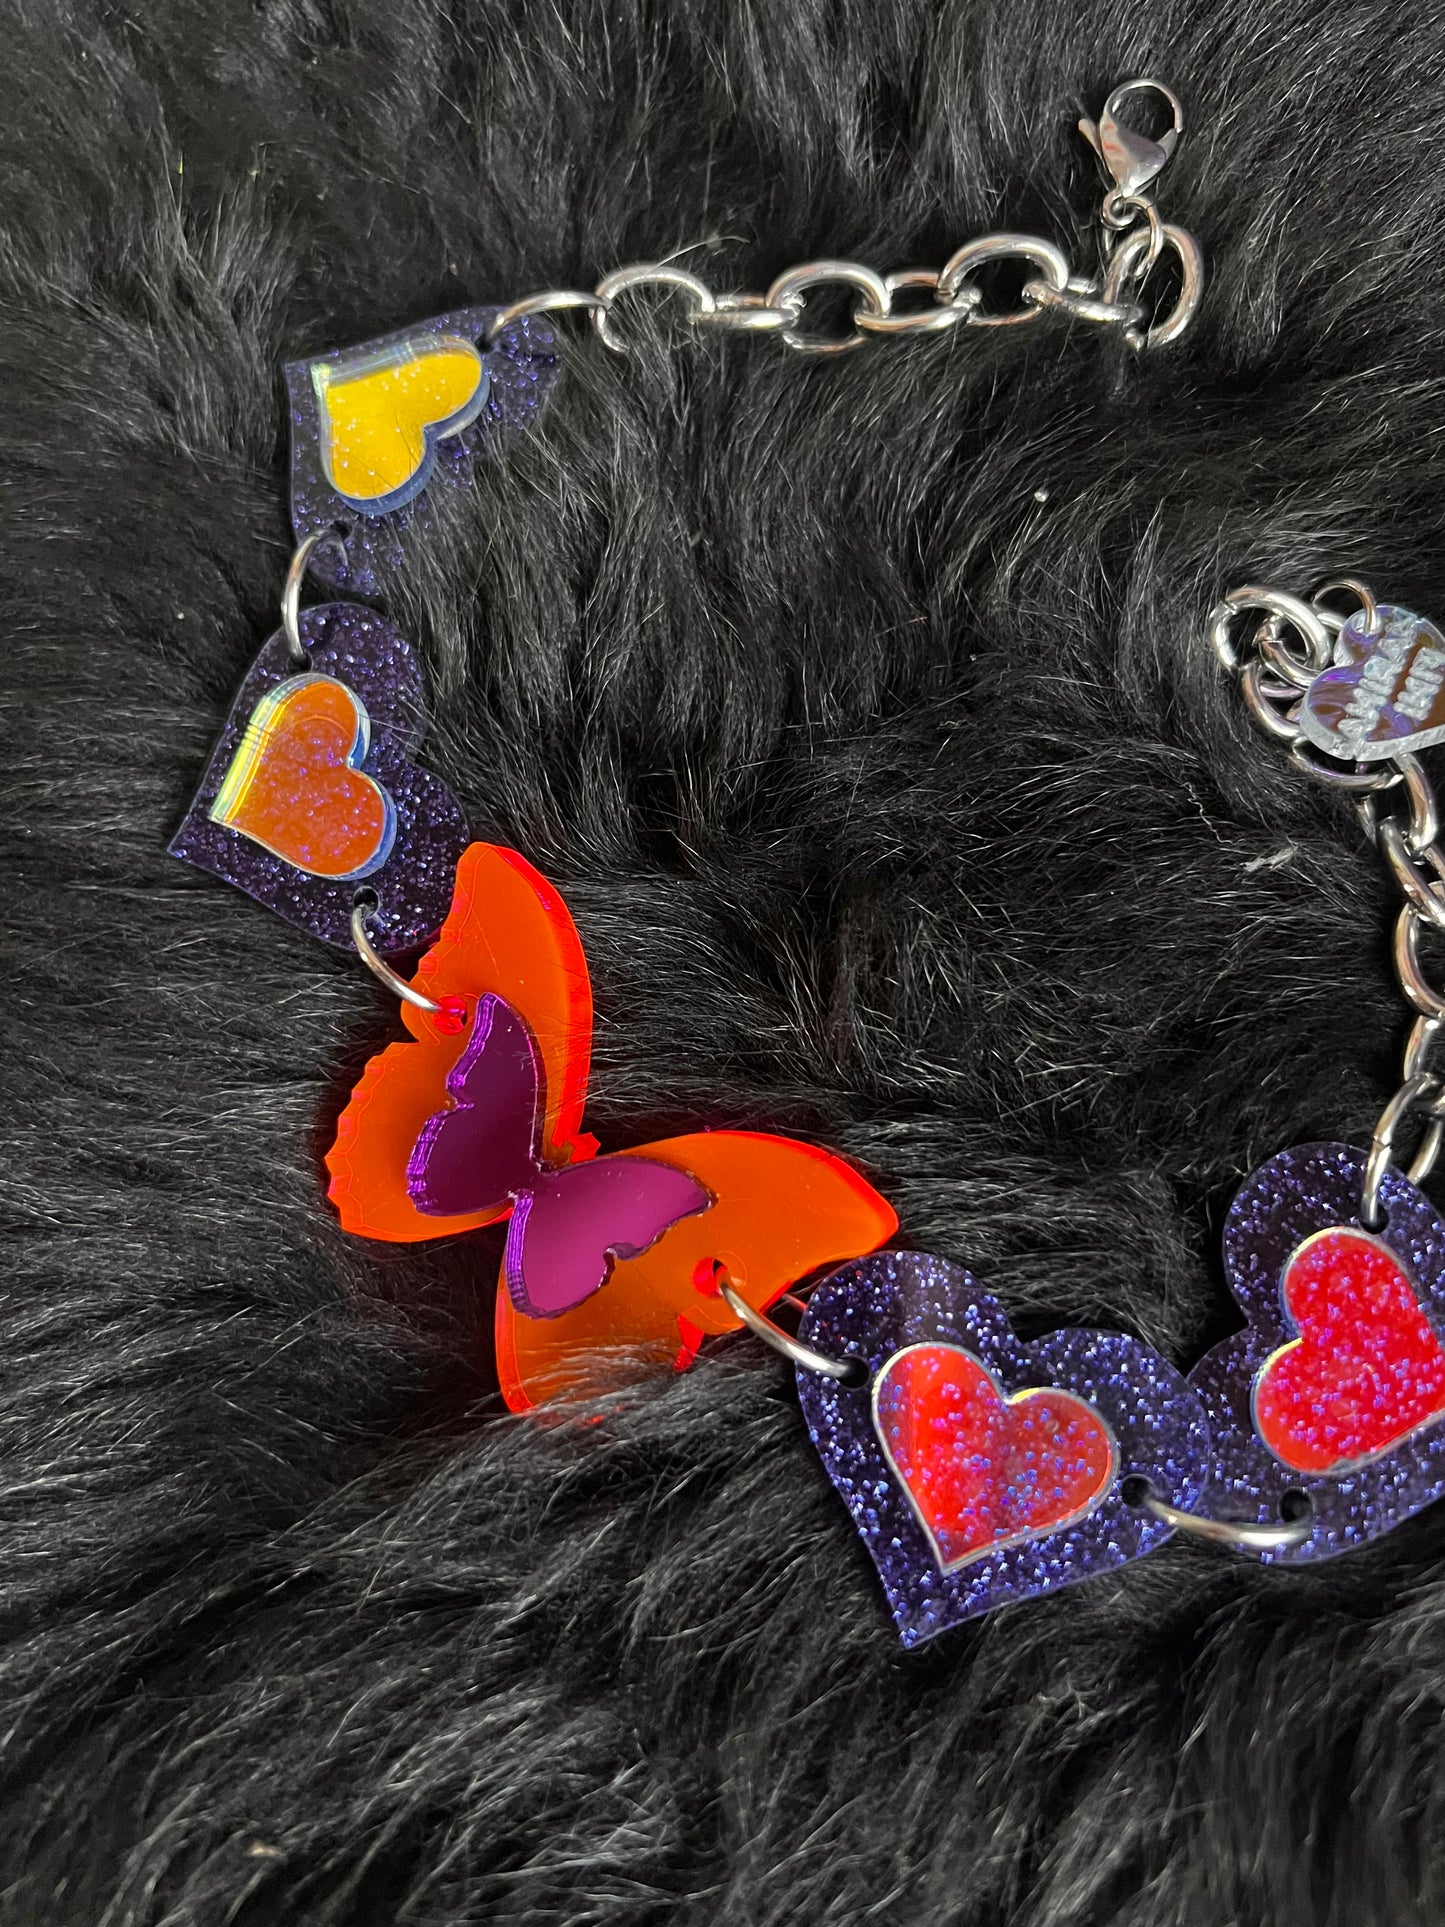 Cheshire cat meow butterfly 💓🦋💓 love Choker